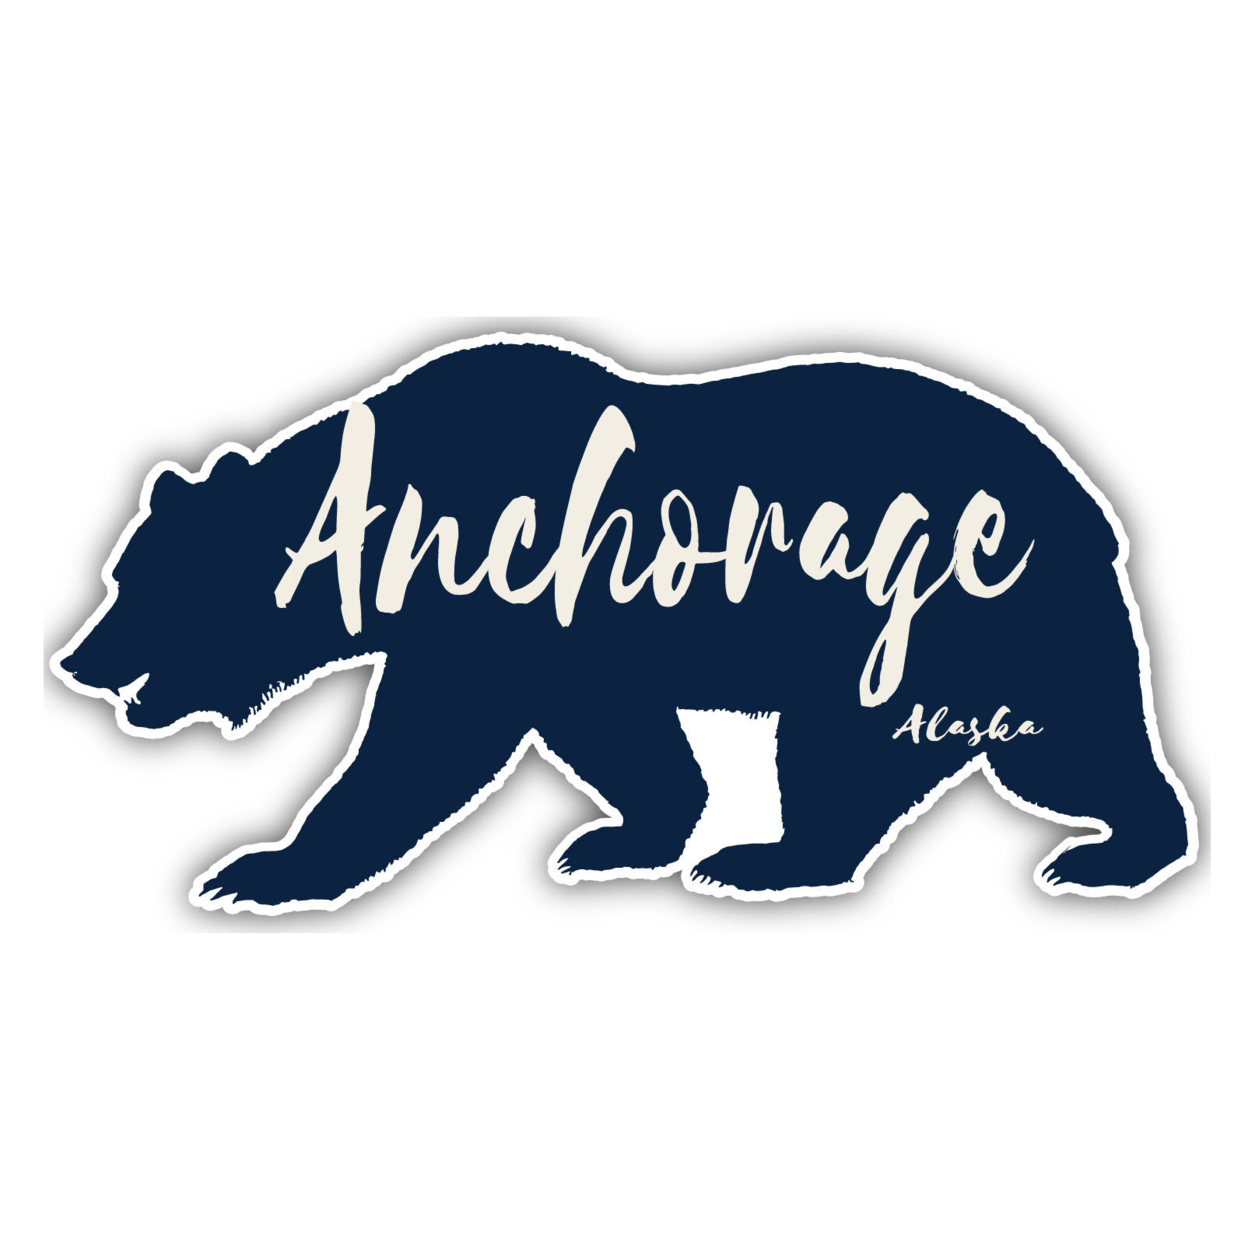 Anchorage Alaska Souvenir Decorative Stickers (Choose Theme And Size) - 4-Pack, 8-Inch, Great Outdoors